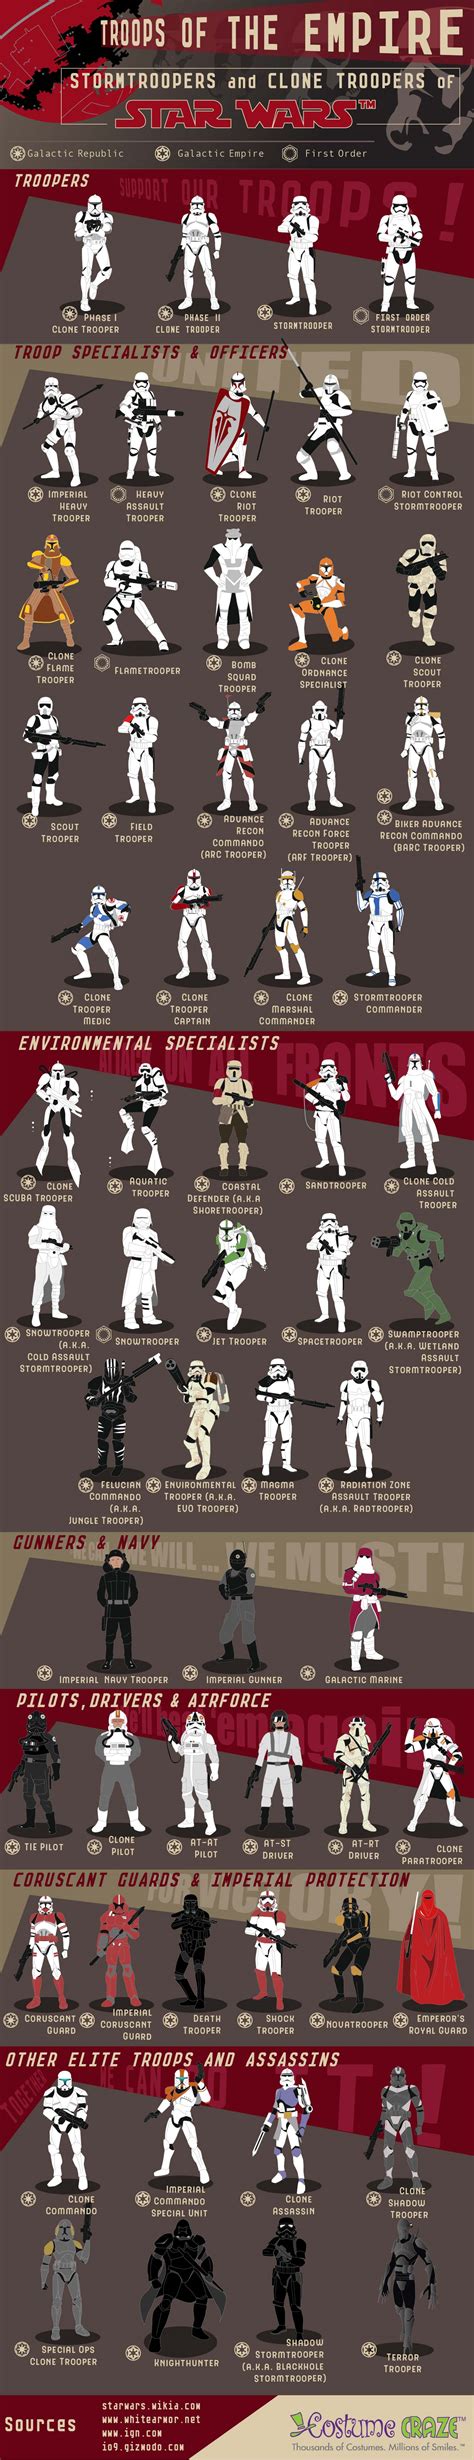 Stormtroopers And Clone Troopers Of Star Wars Infographic